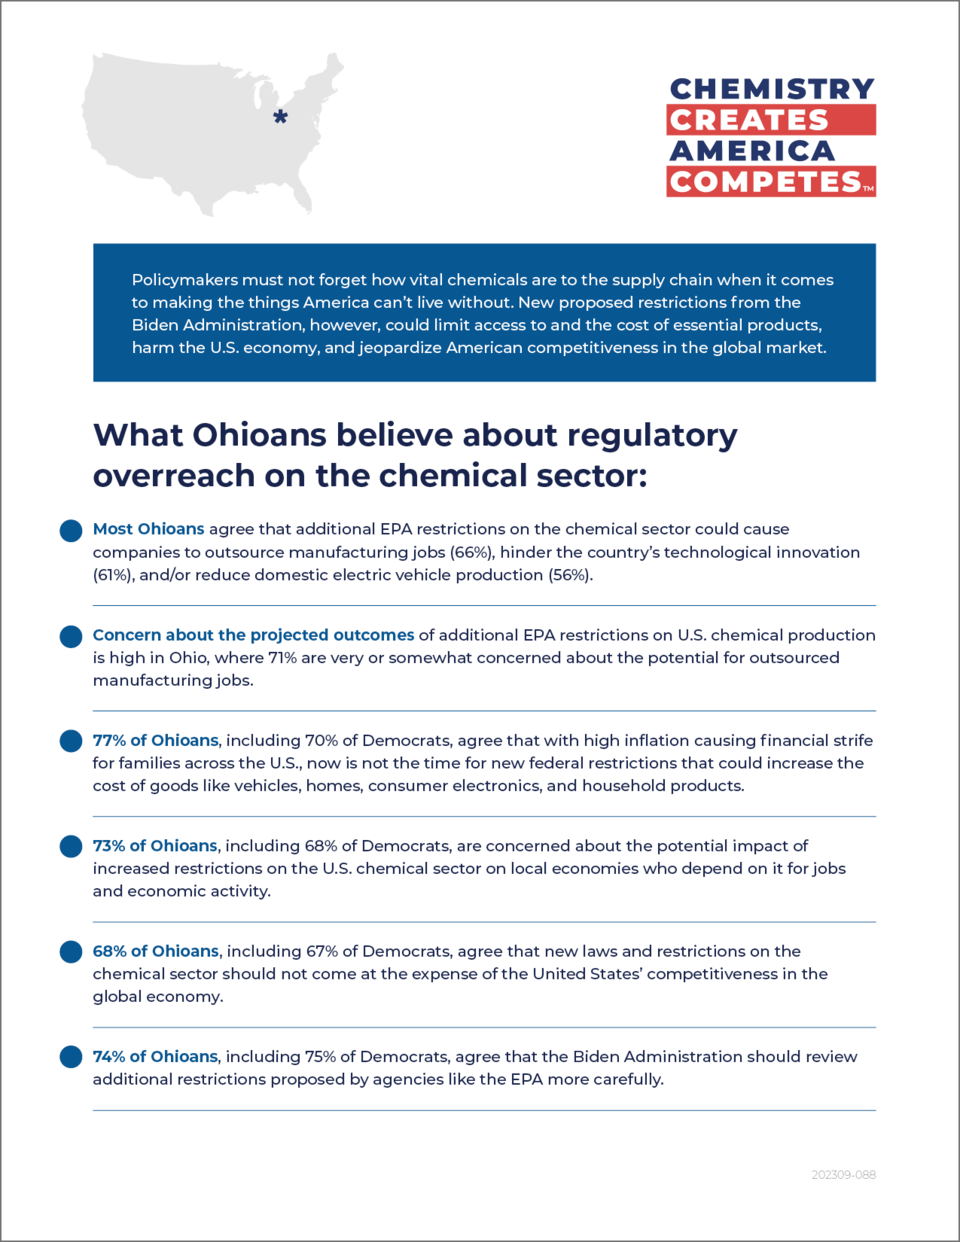 What Ohioans Believe About Regulatory Overreach on Chemical Sector - Fact Sheet